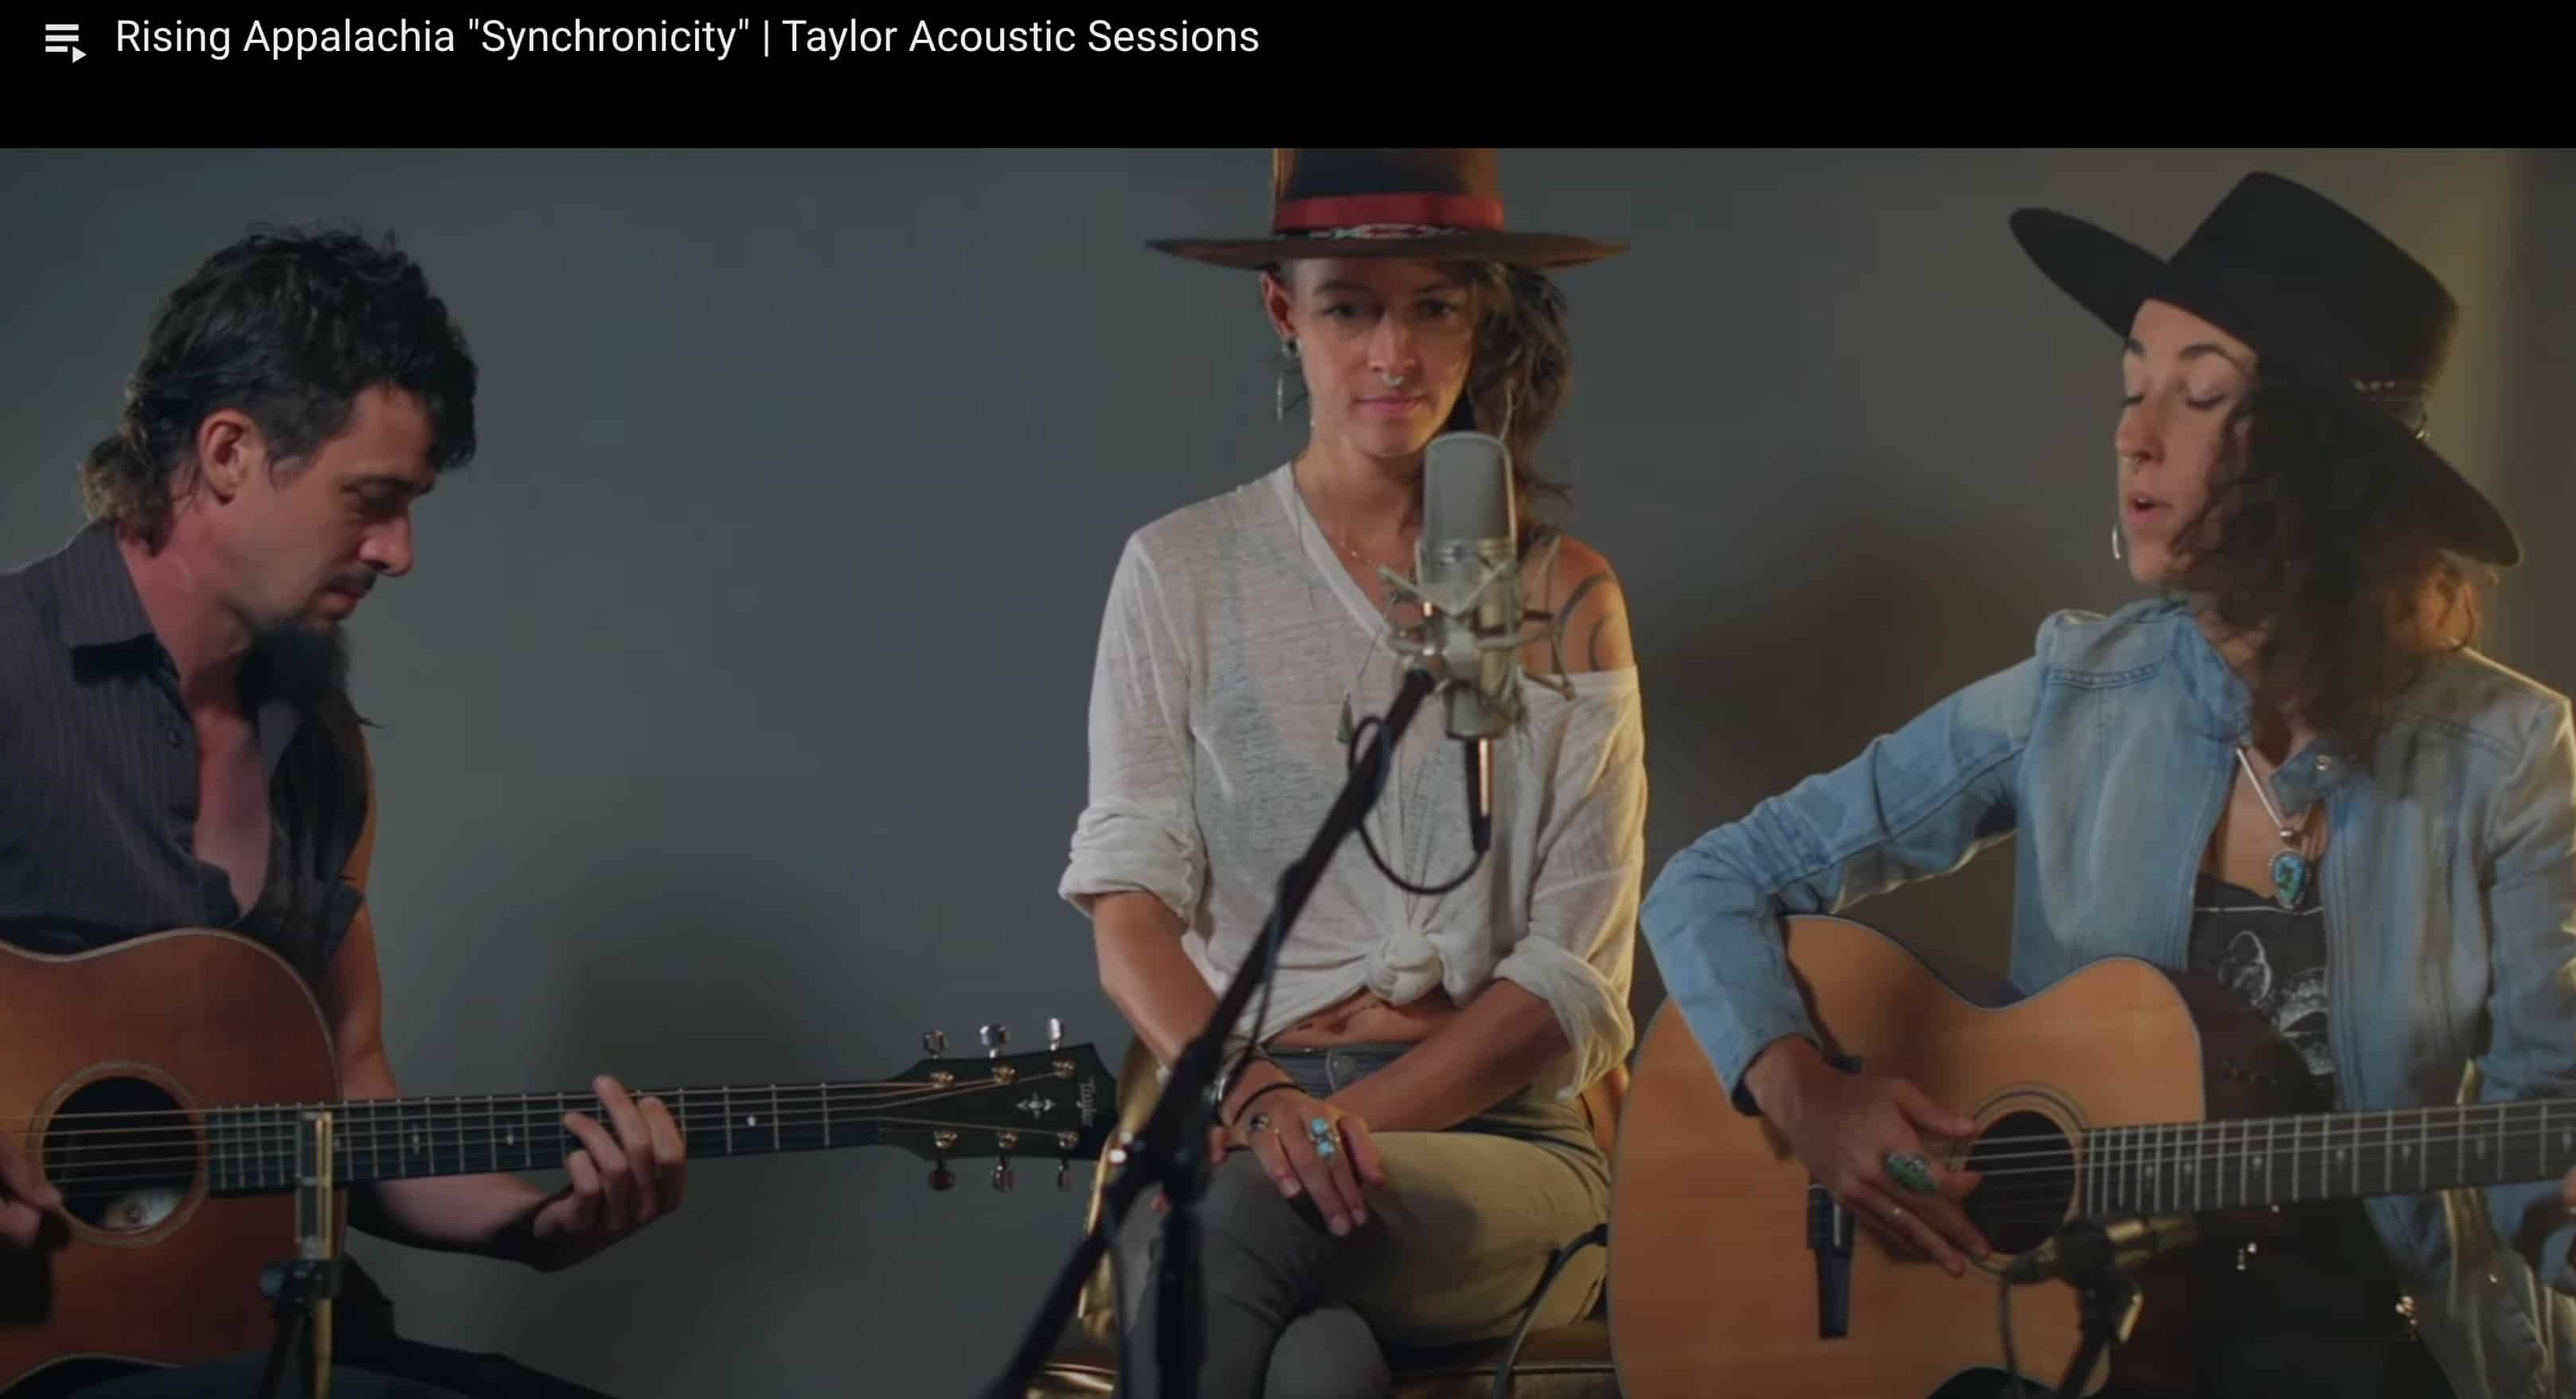 Watch Rising Appalachia Perform Their Hypnotic “Synchronicity” On The Latest Taylor Acoustic Sessions